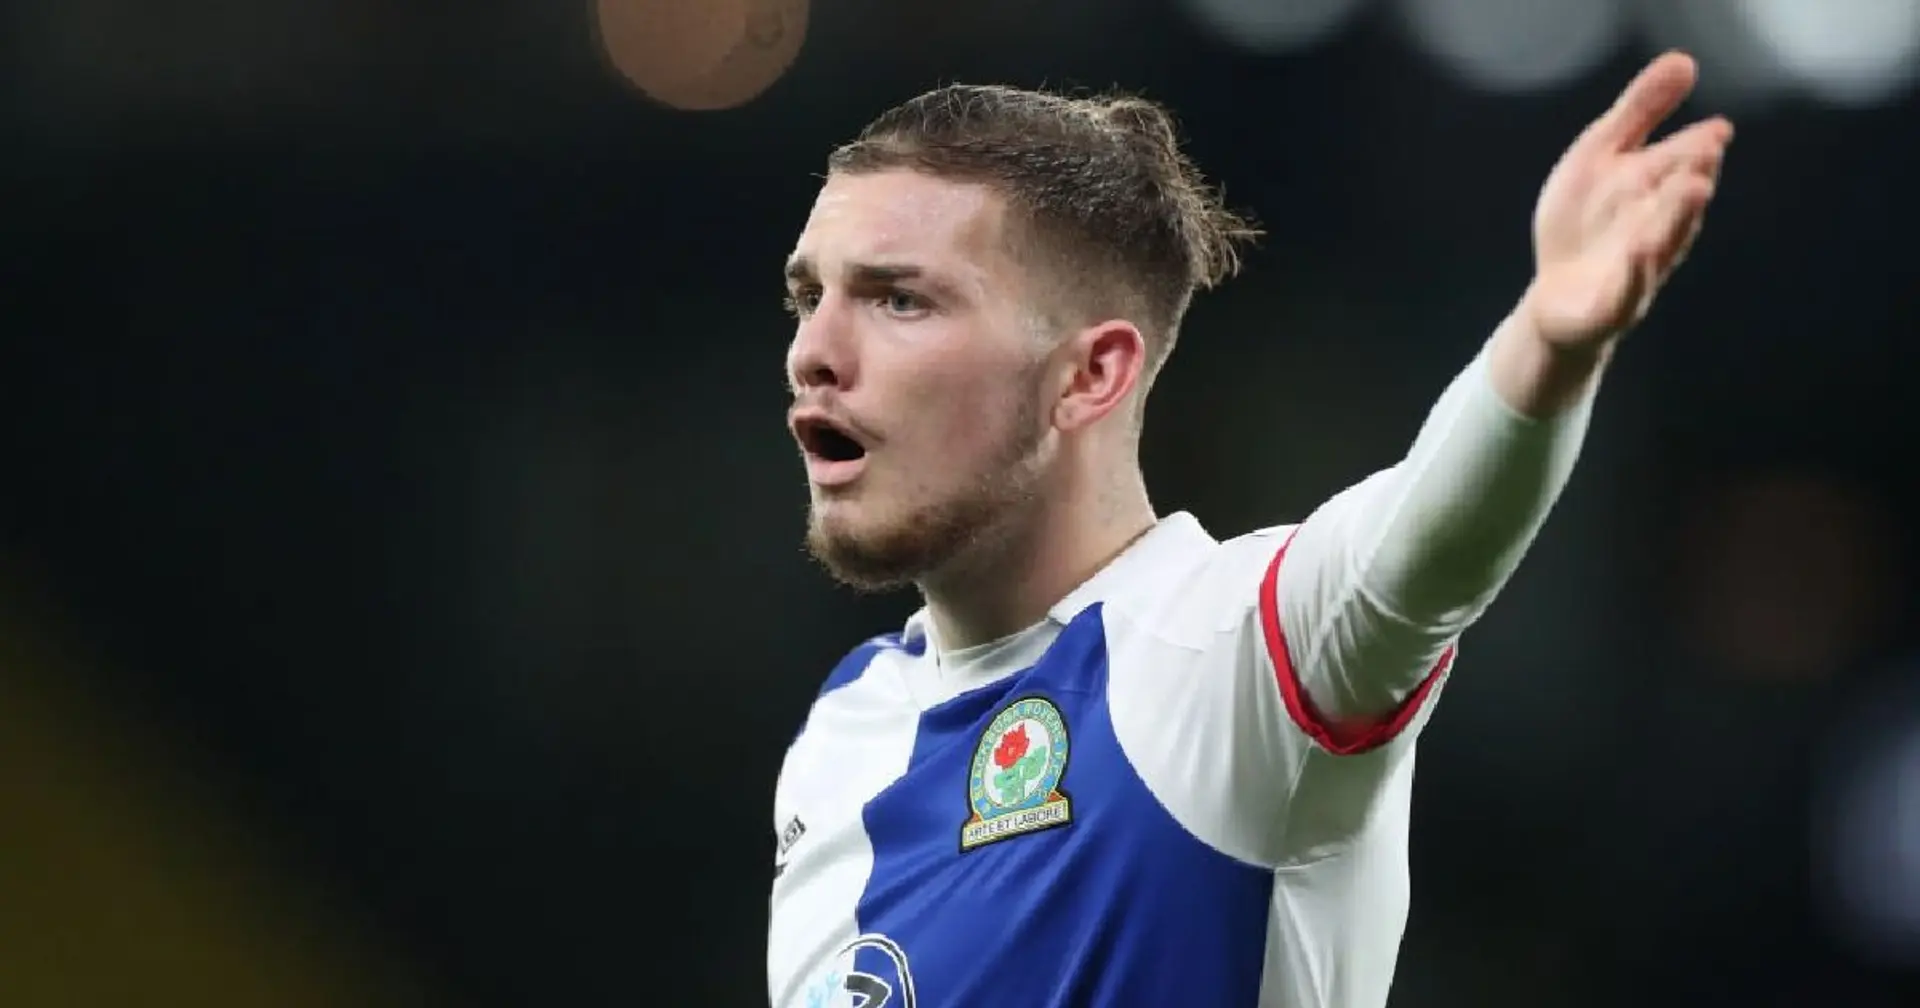 'A real talent who commands a place in the team': Blackburn fans react to Elliott's superb performances